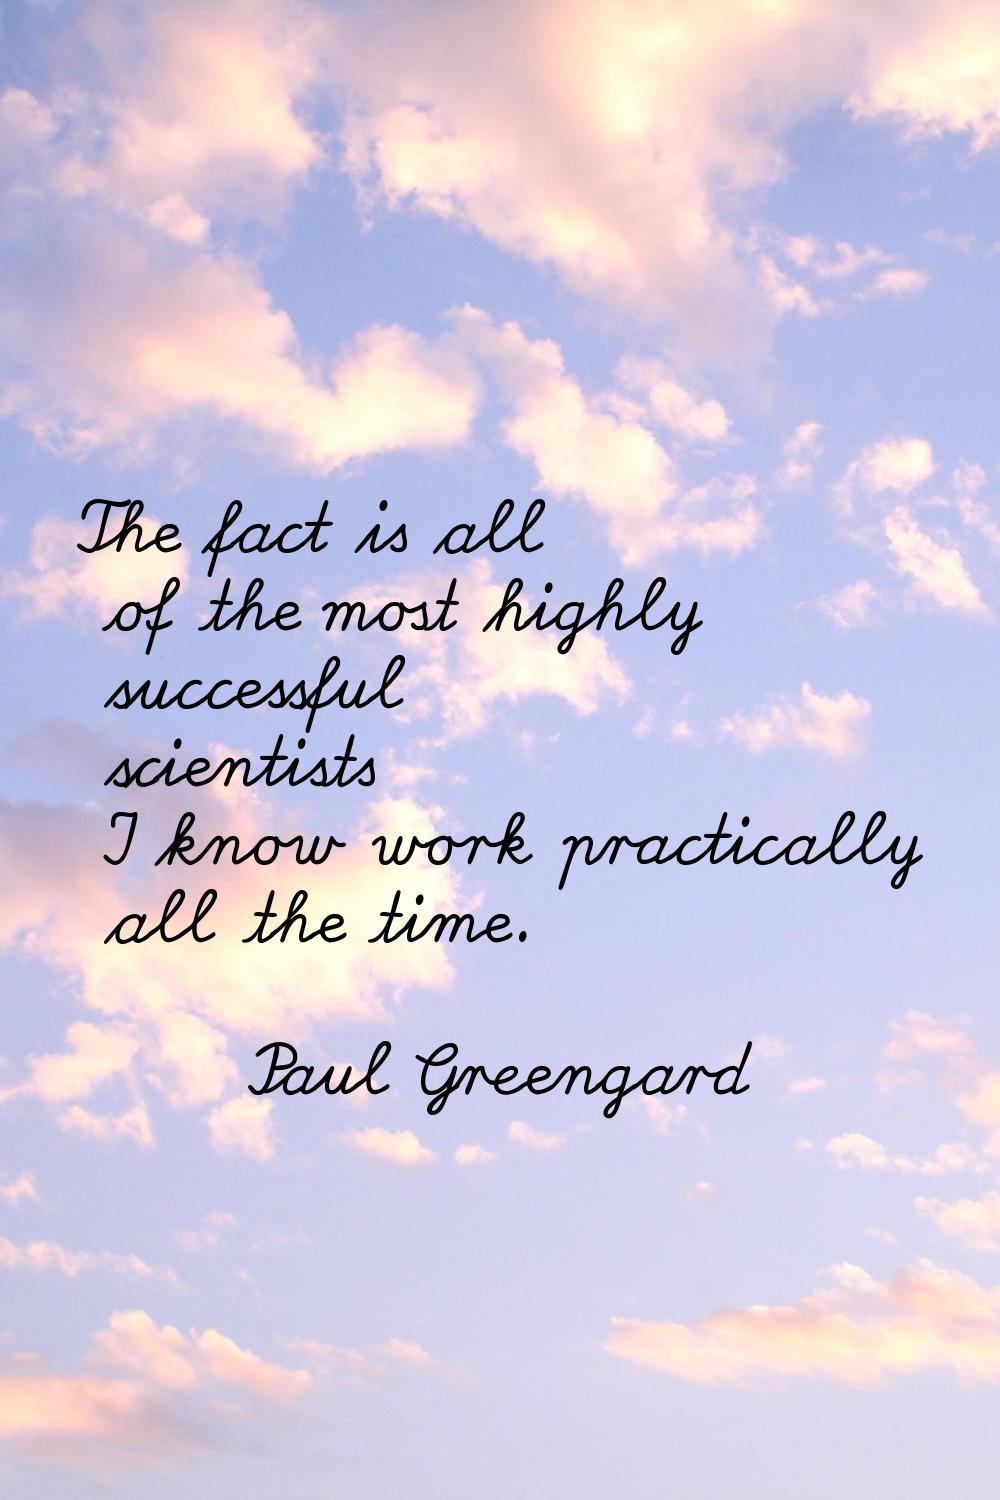 The fact is all of the most highly successful scientists I know work practically all the time.